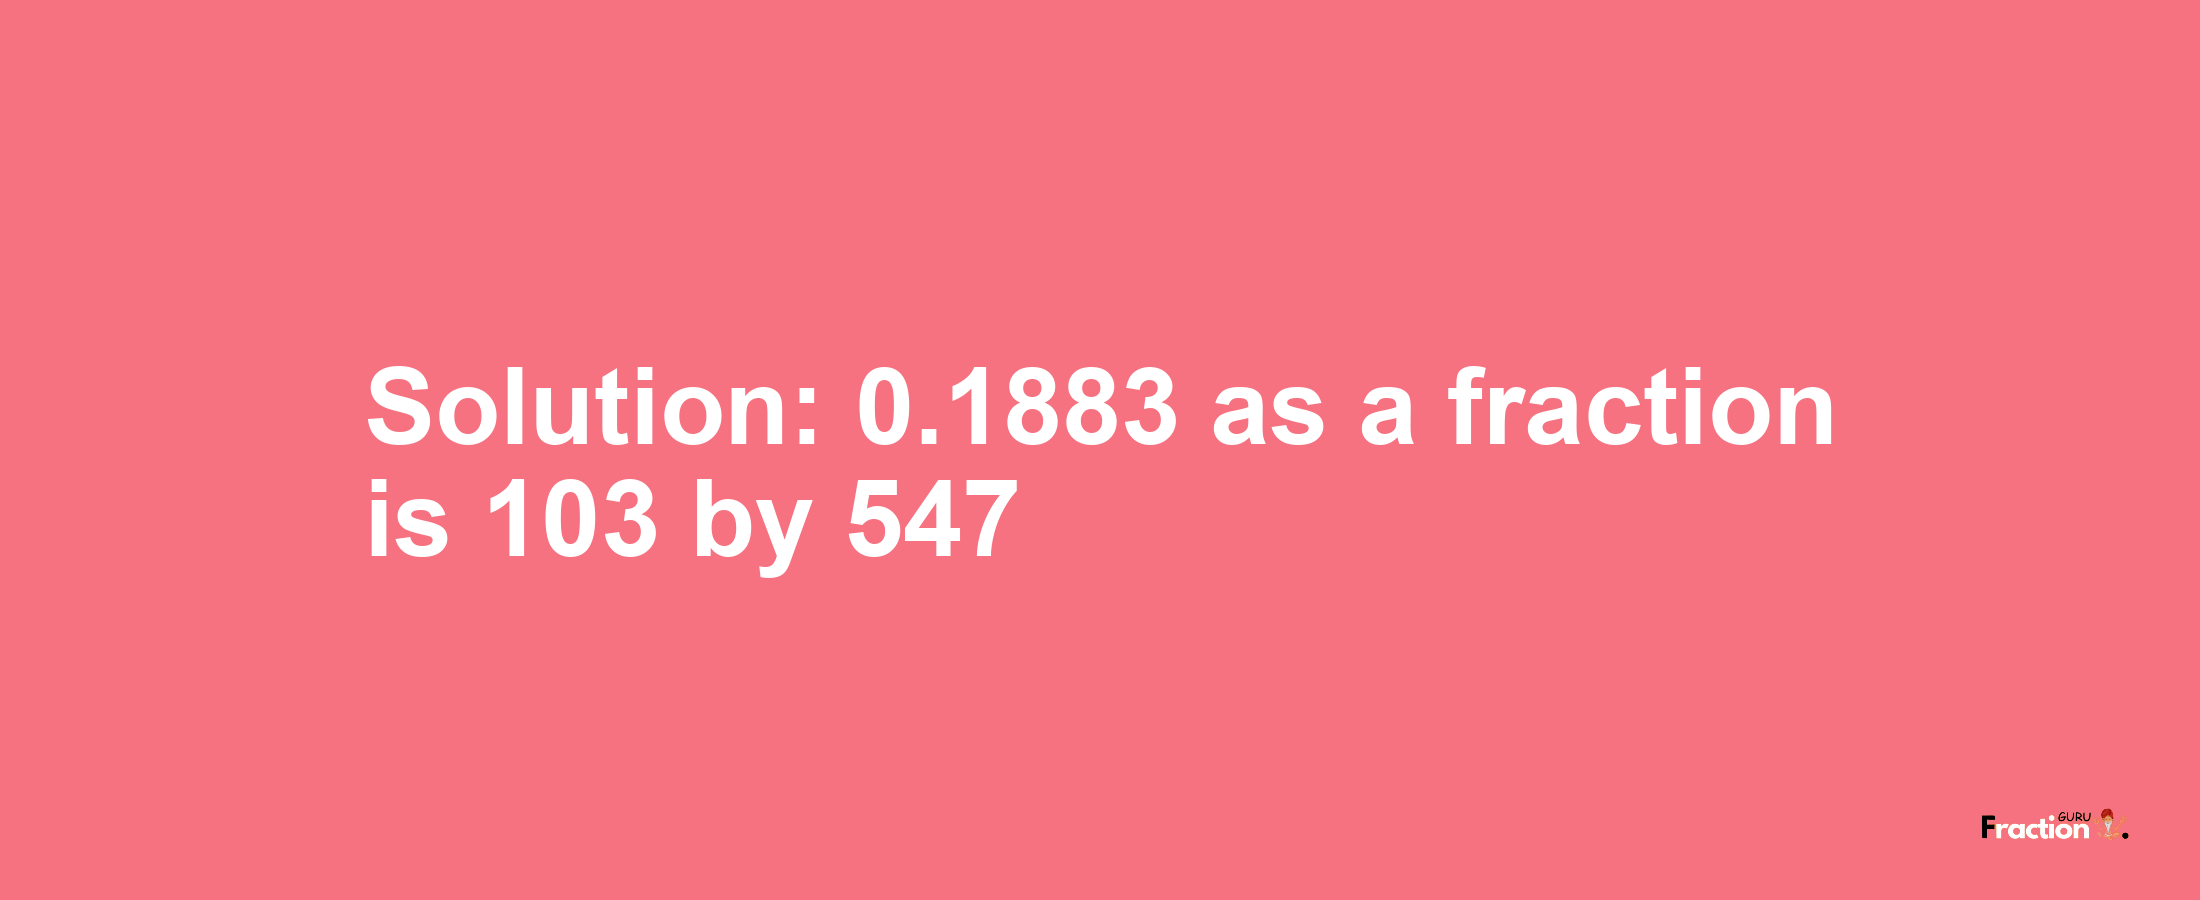 Solution:0.1883 as a fraction is 103/547